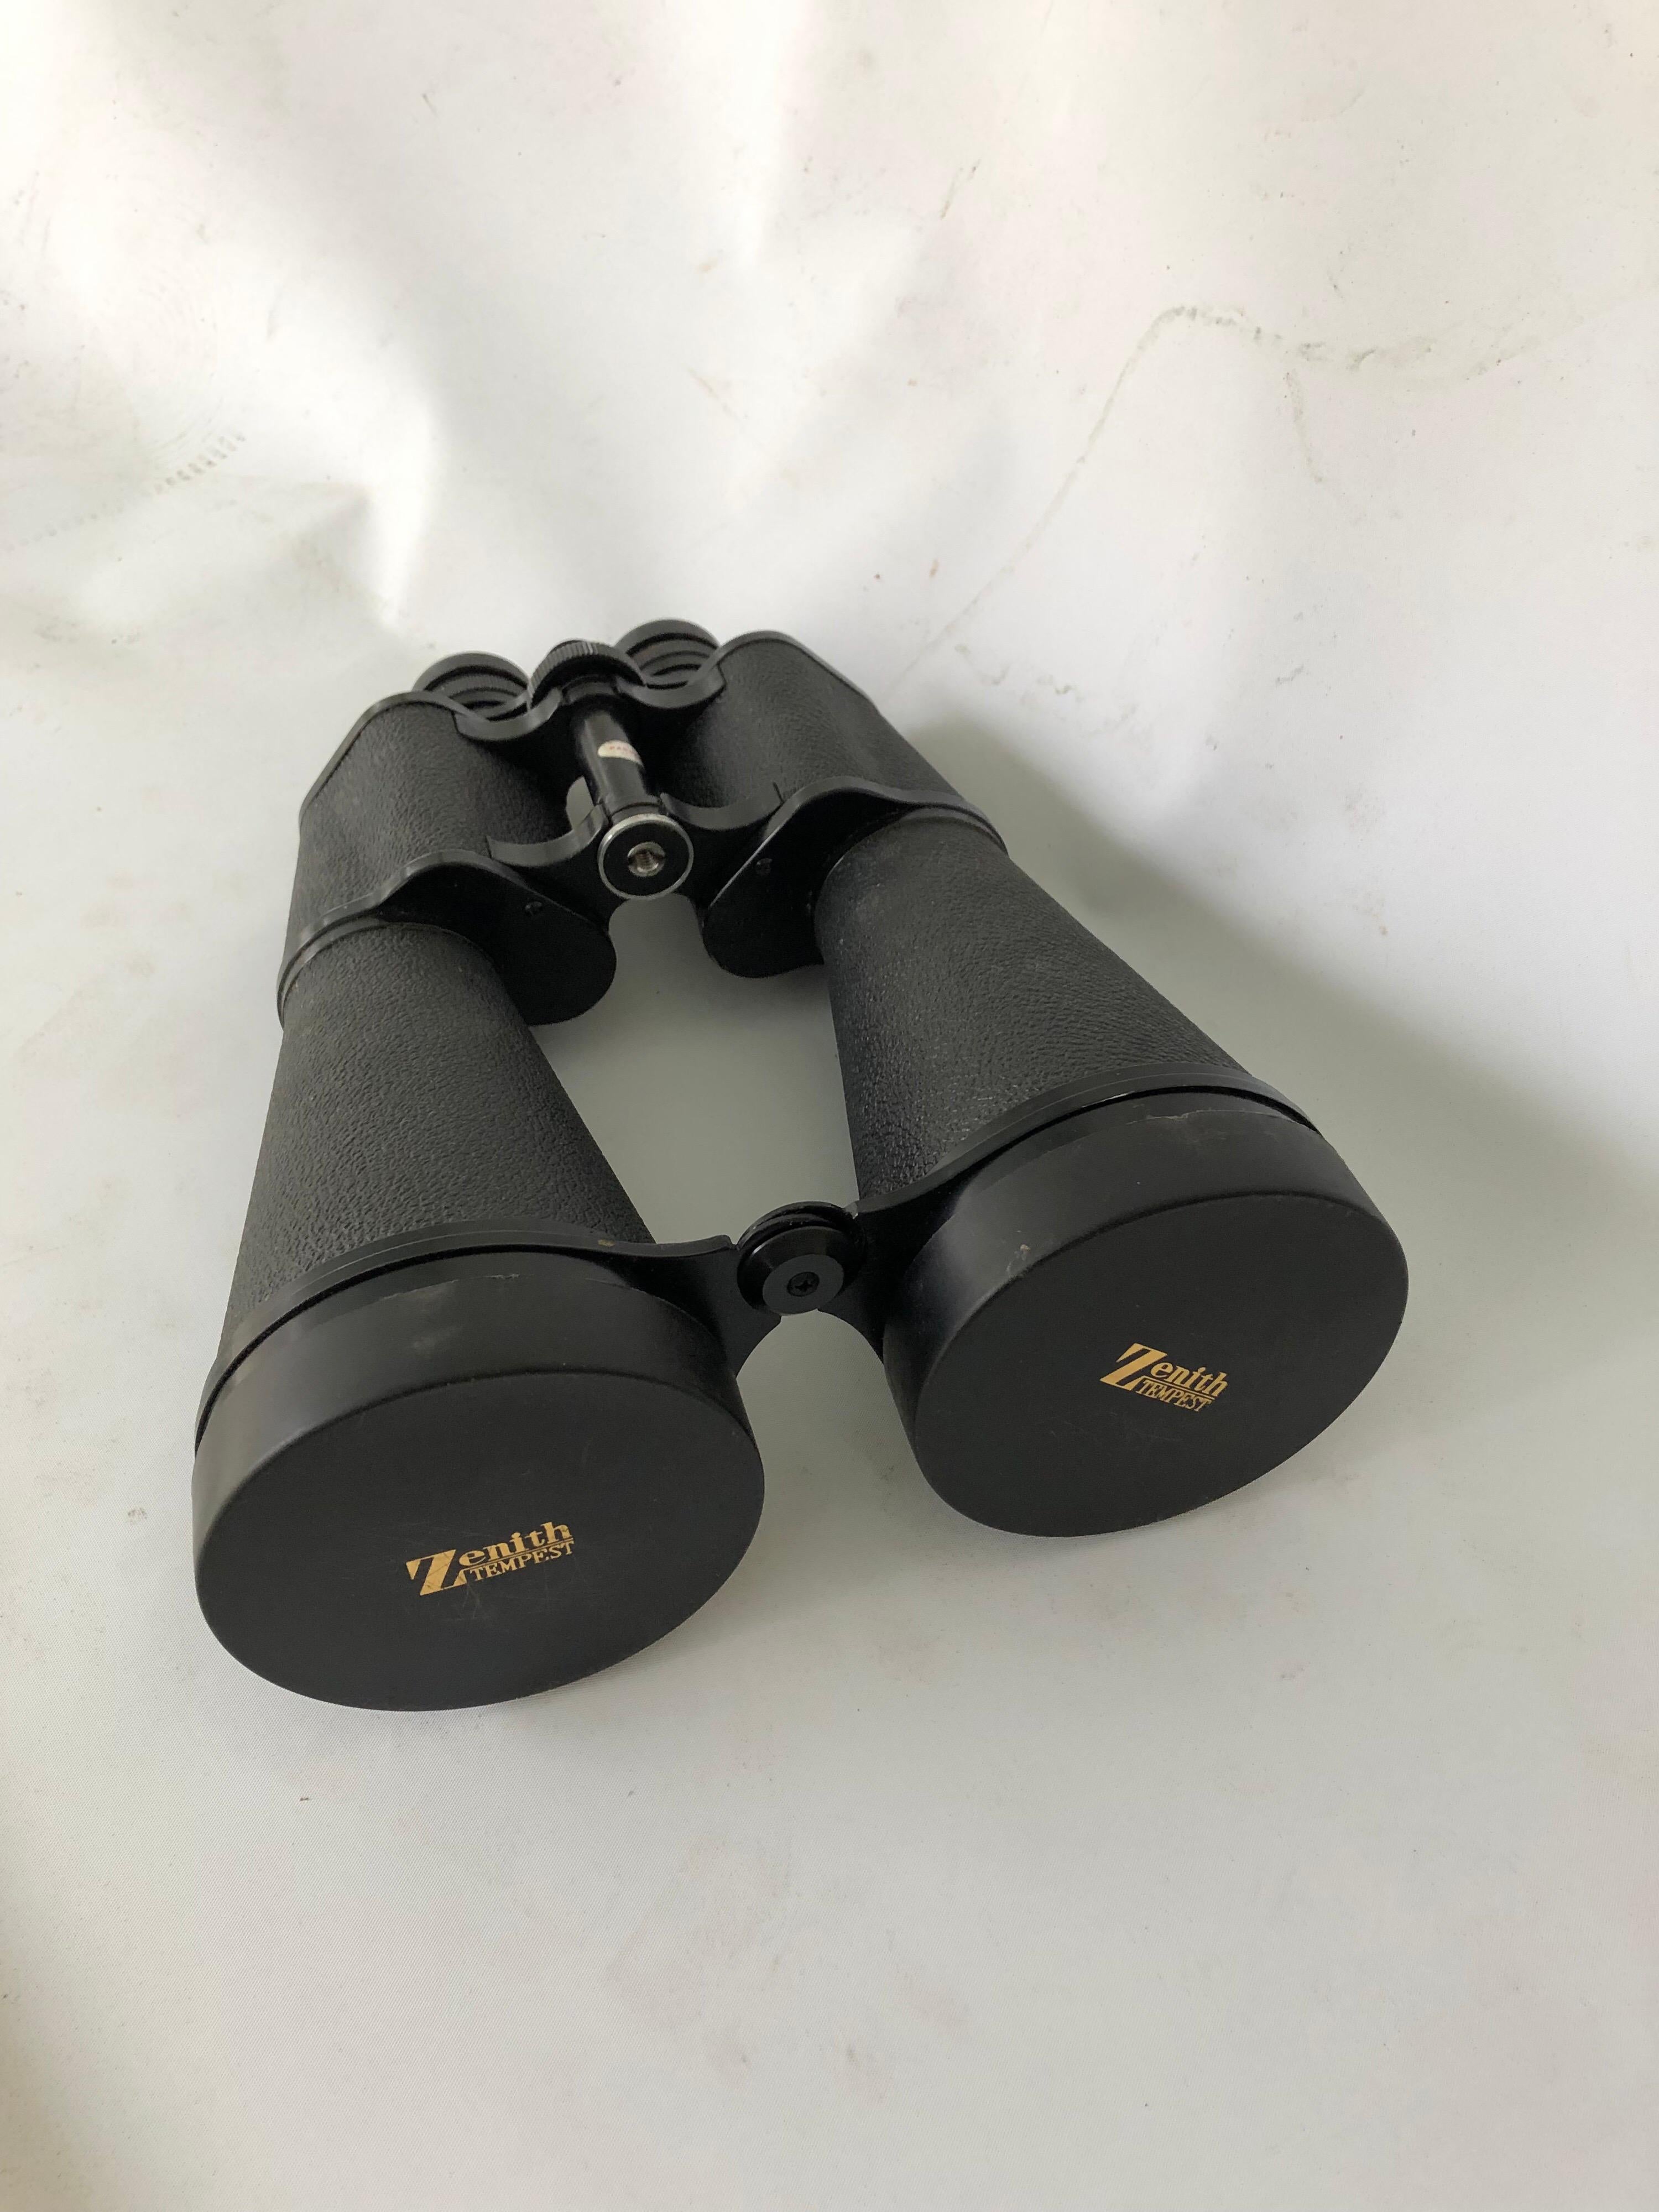 Extremely tall zenith tempest 20 x 80 binoculars in black leather case with red felt interior lining. Straps for both the binoculars and the case.